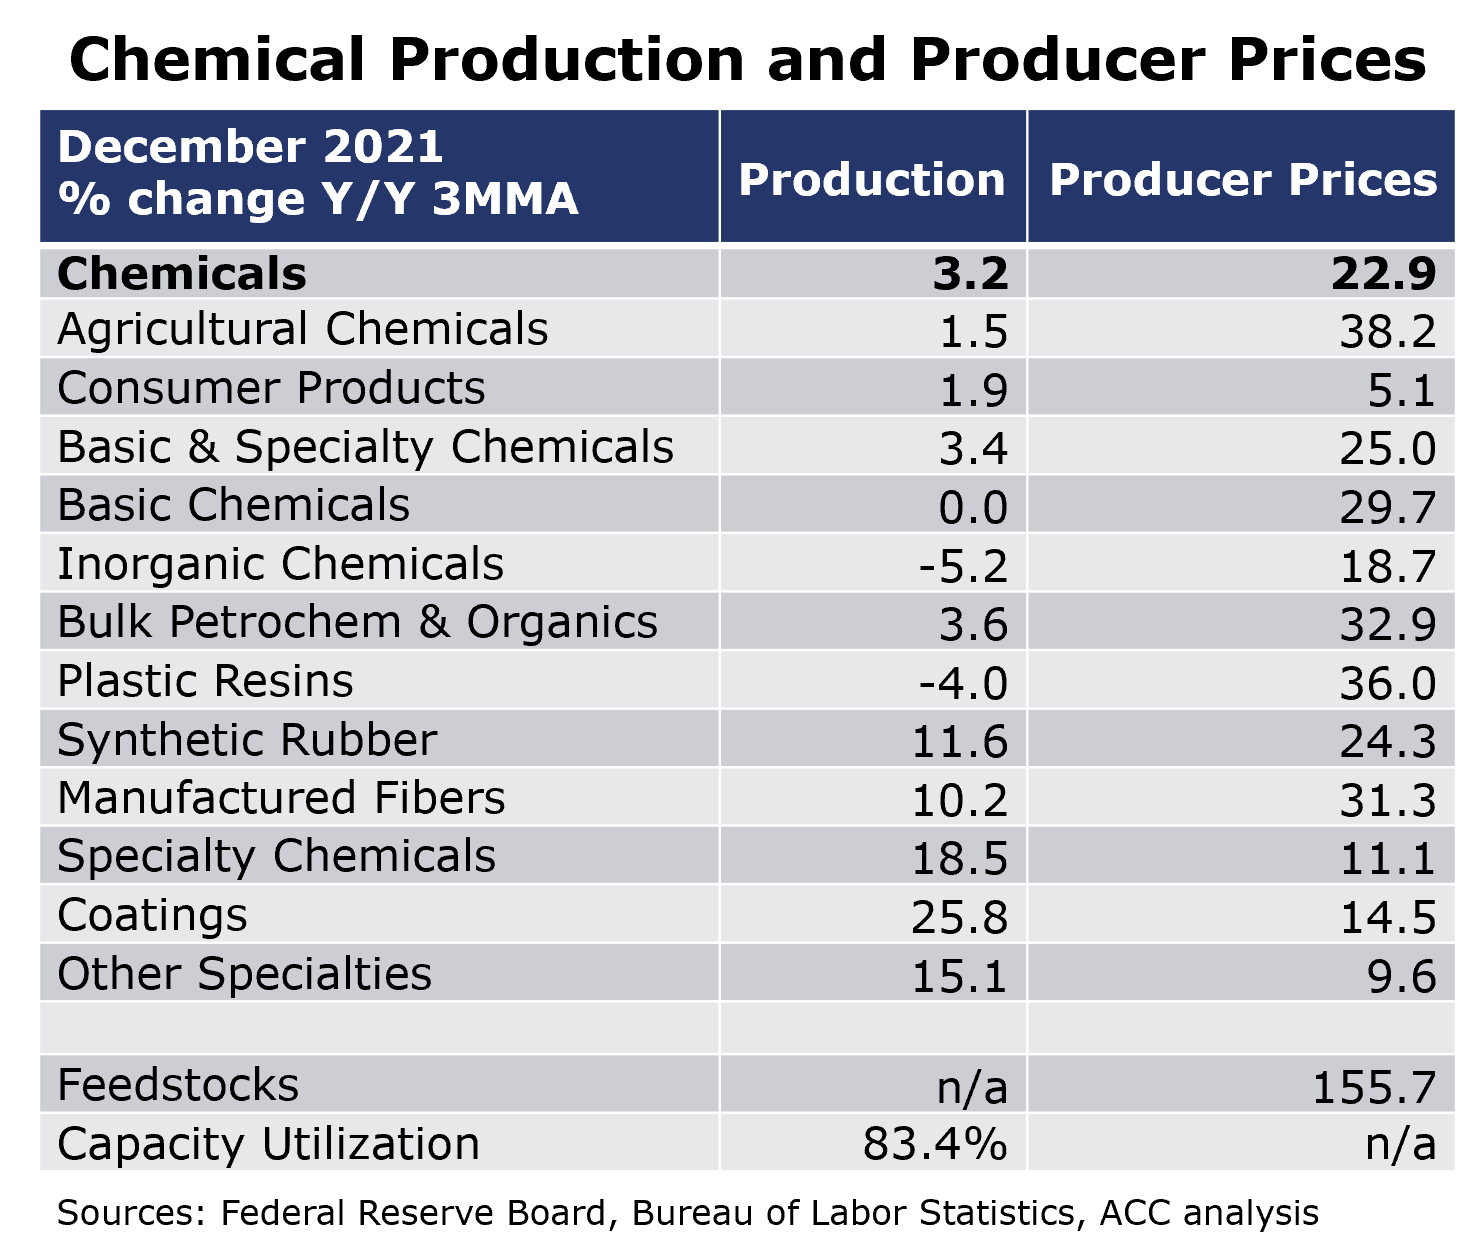 01-14-22-Chemical Production